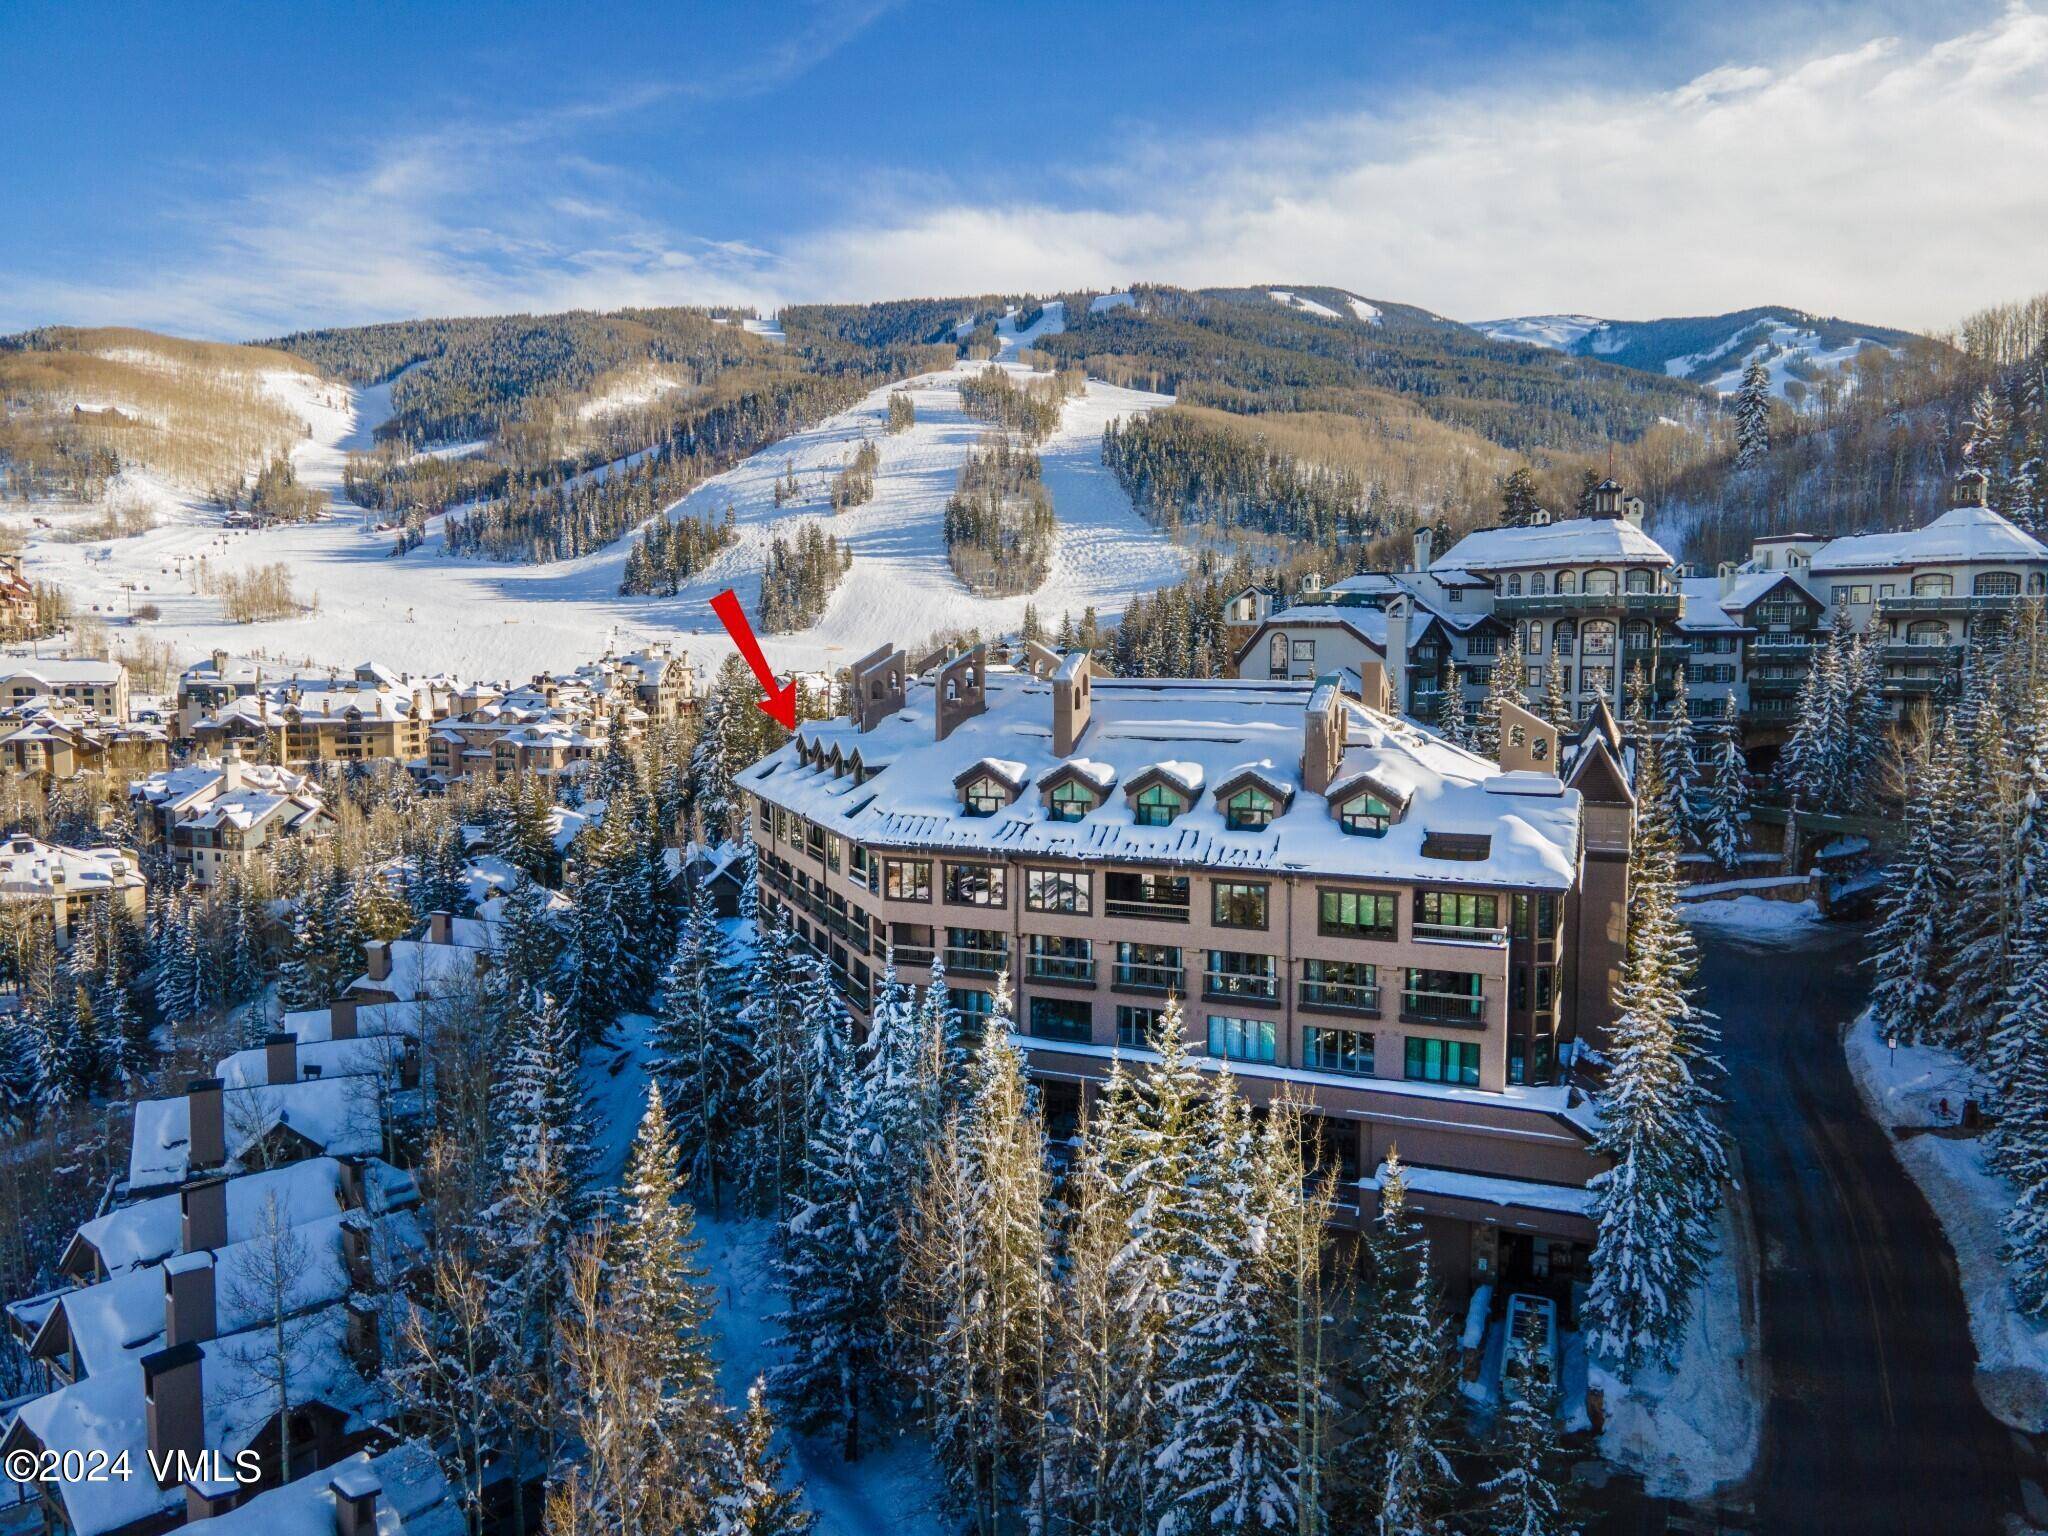 LUXURIOUS 2 BEDROOM PENTHOUSE IN THE PINES LODGE, YOUR BEAVER CREEK HAVEN Perfect for luxury living or as a coveted gathering spot, this penthouse embodies the essence of upscale mountain ...